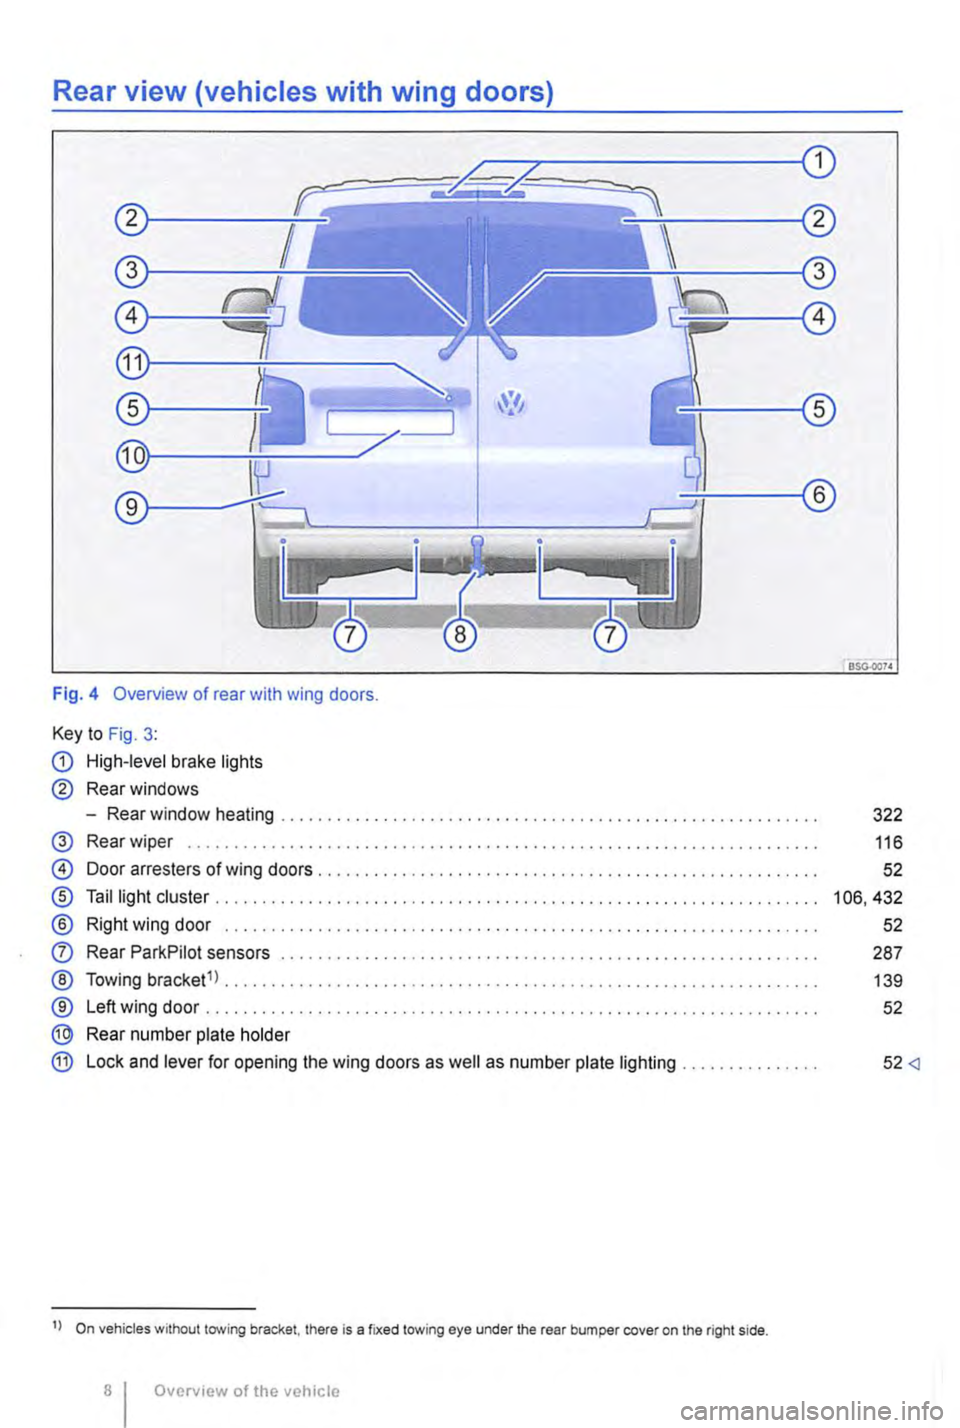 VOLKSWAGEN TRANSPORTER 2010  Owners Manual Rear view (vehicles with wing doors) 
Fig. 4 Overview of rear with wing doors. 
Key to Fig. 3: 
G) High-level brake lights 
® Rear windows 
-Rear window heating ......................................